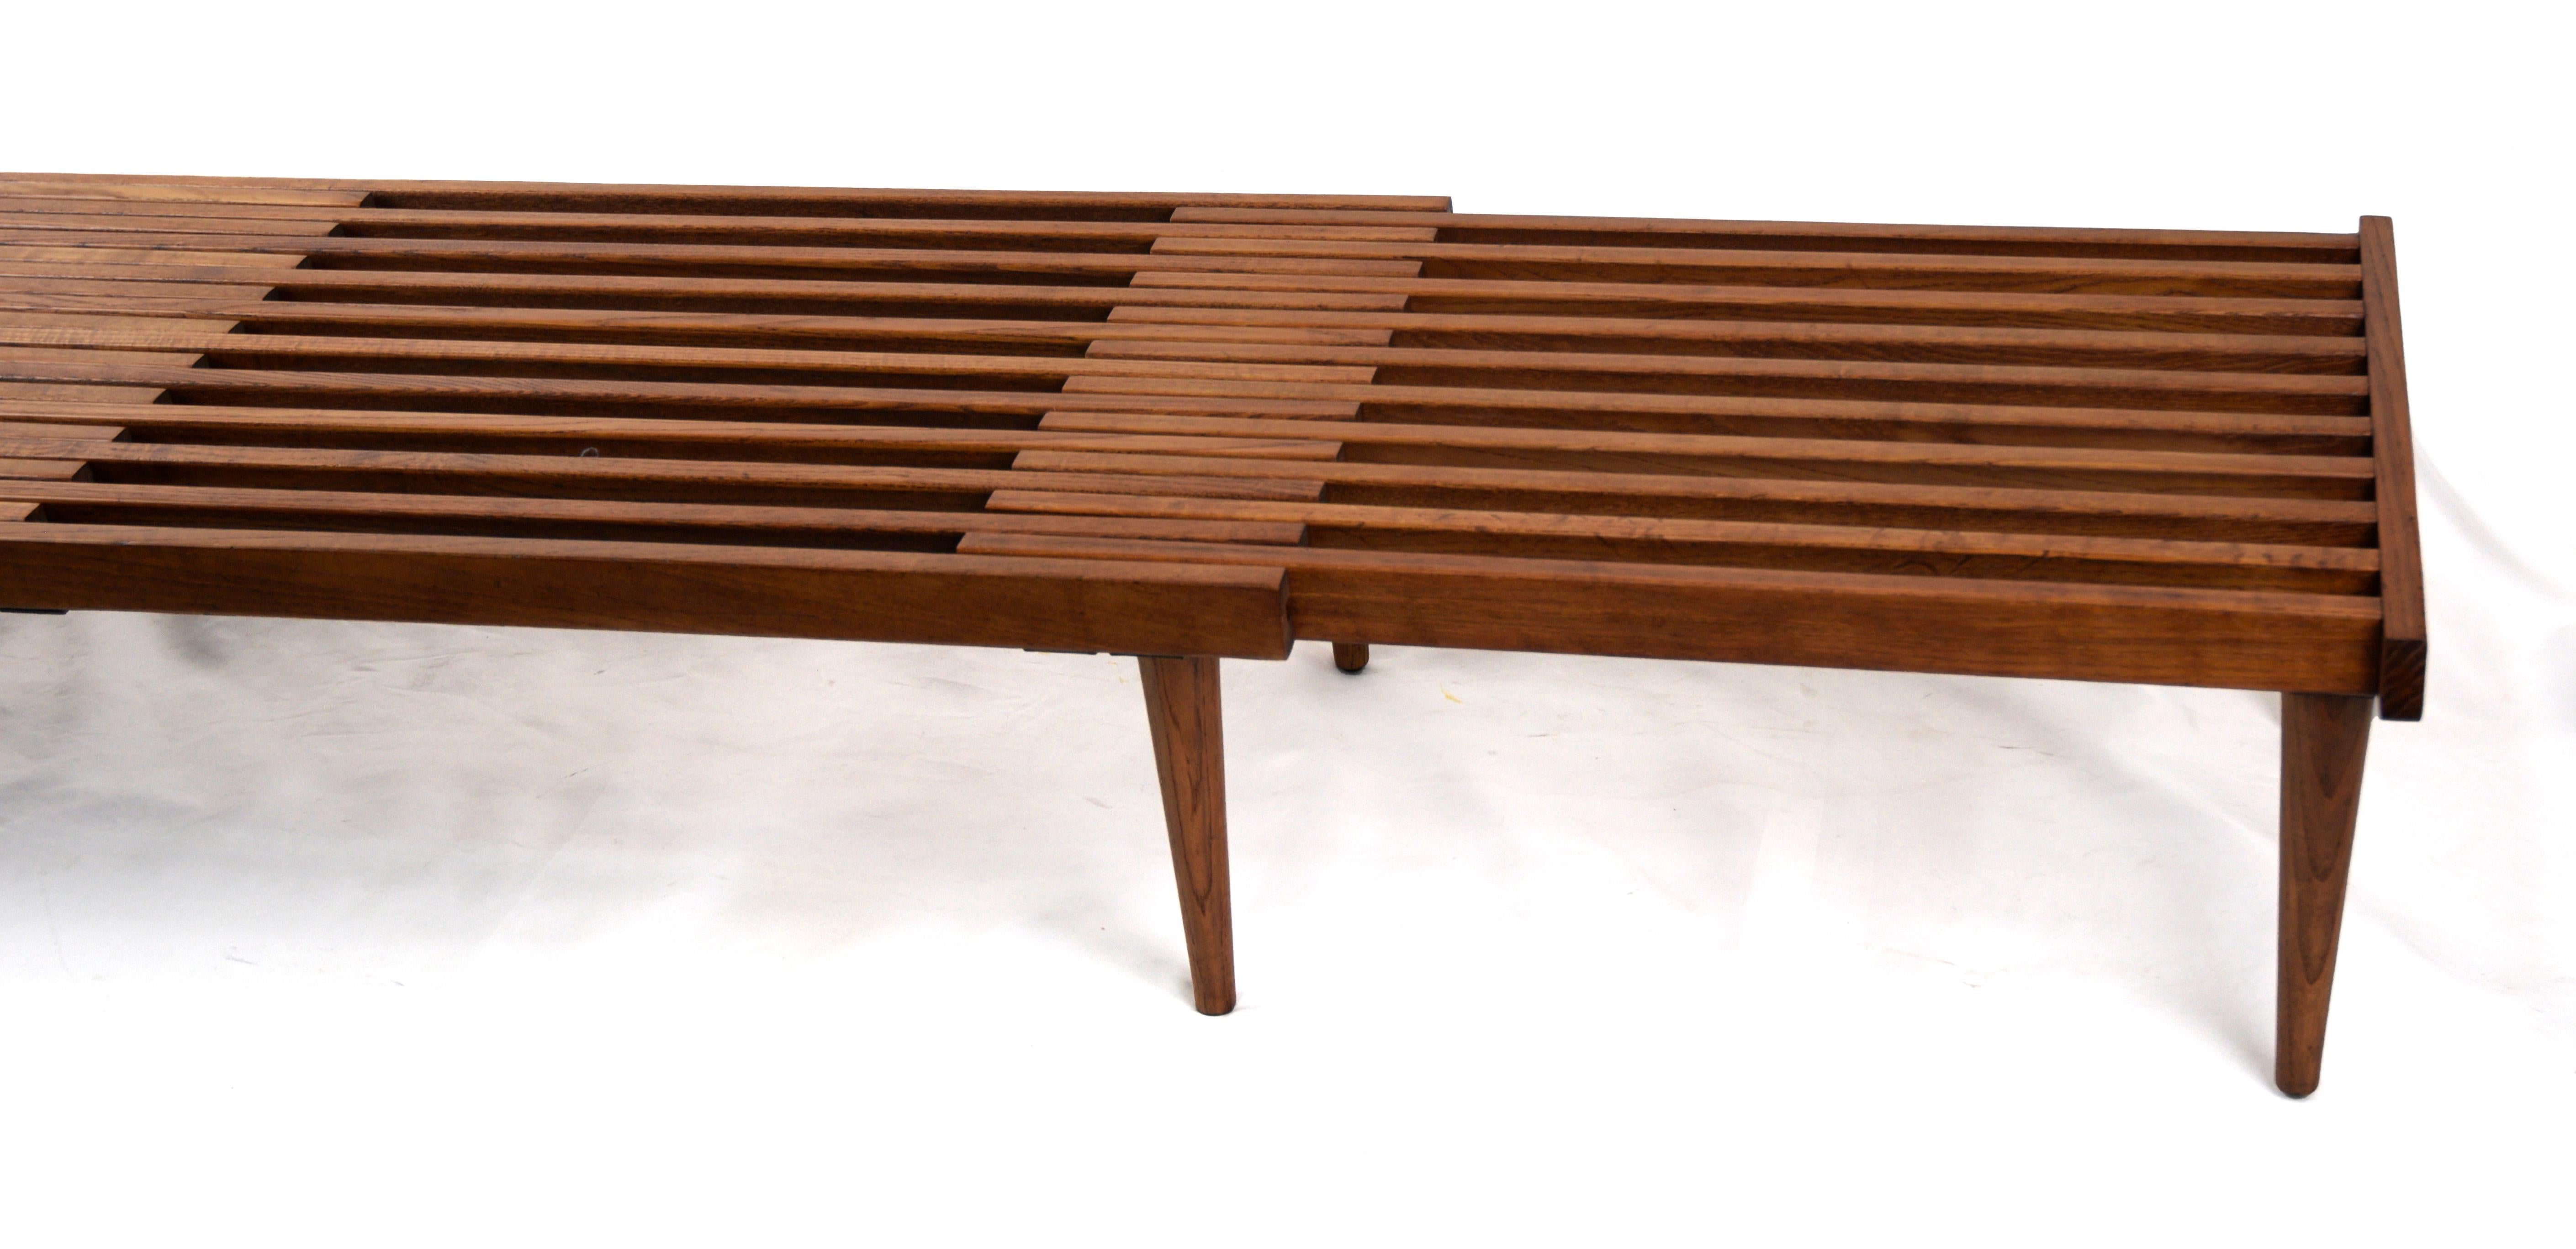 Beautiful and versatile expandable mid century minimalist walnut slat bench designed by John Keal for Brown Saltman, circa 1960. This California modern piece features an expandable sliding top with eight support legs. Perfect to use as a living room